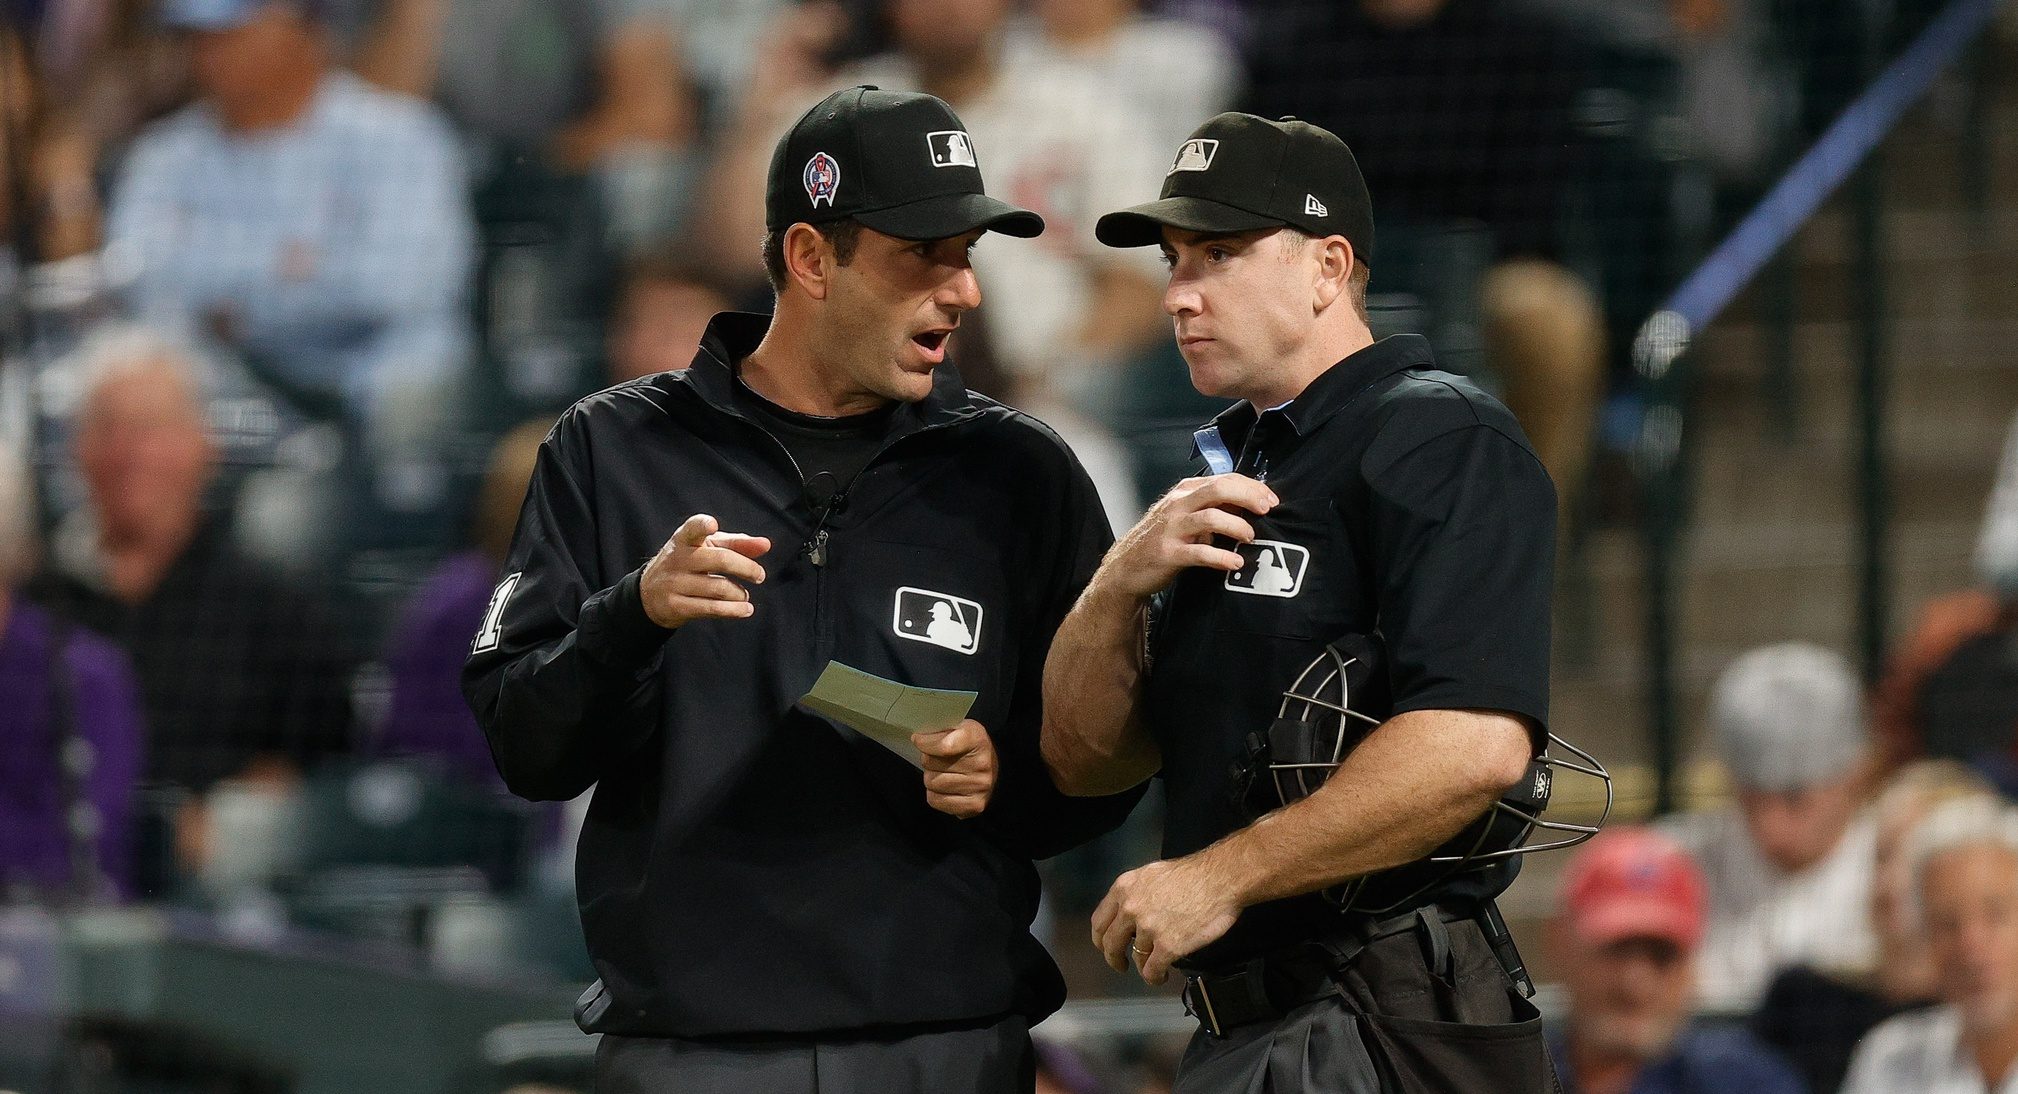 Umpires meeting at home plate after the premature exit of umpire Brian O'Nora